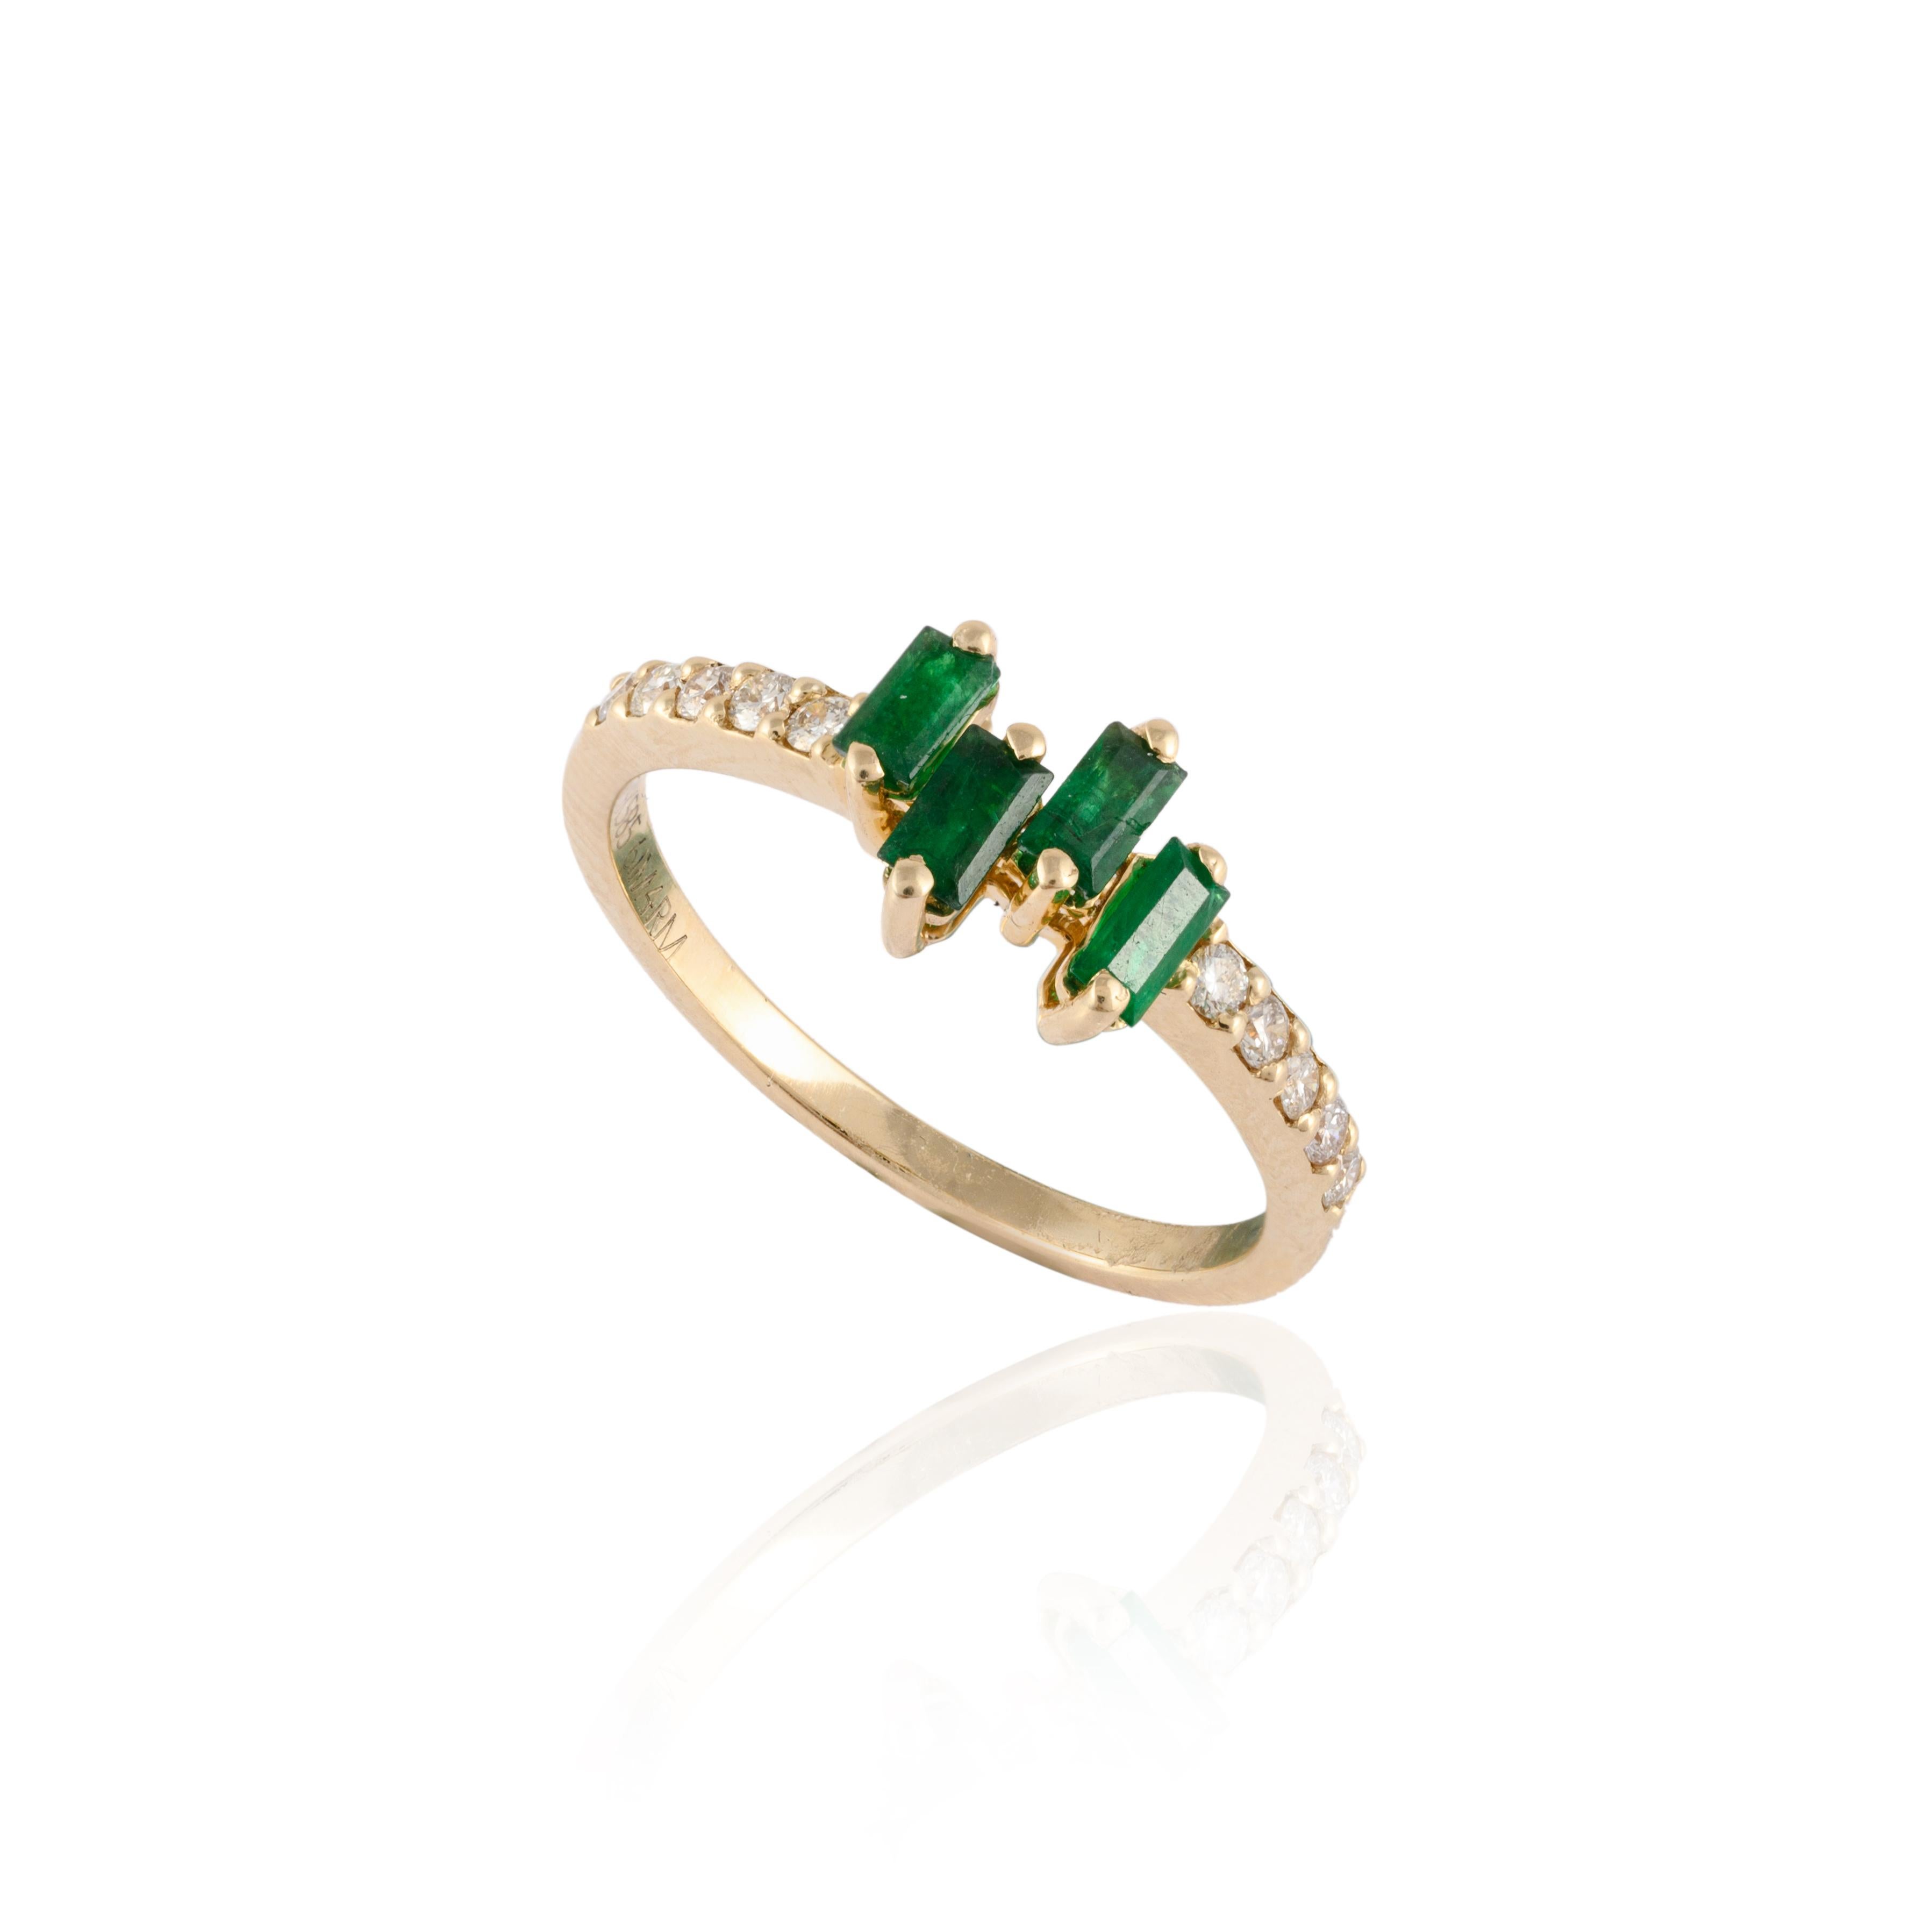 For Sale:  Solid 14 Karat Yellow Gold Emerald and Diamond Minimalist Ring Gift 9